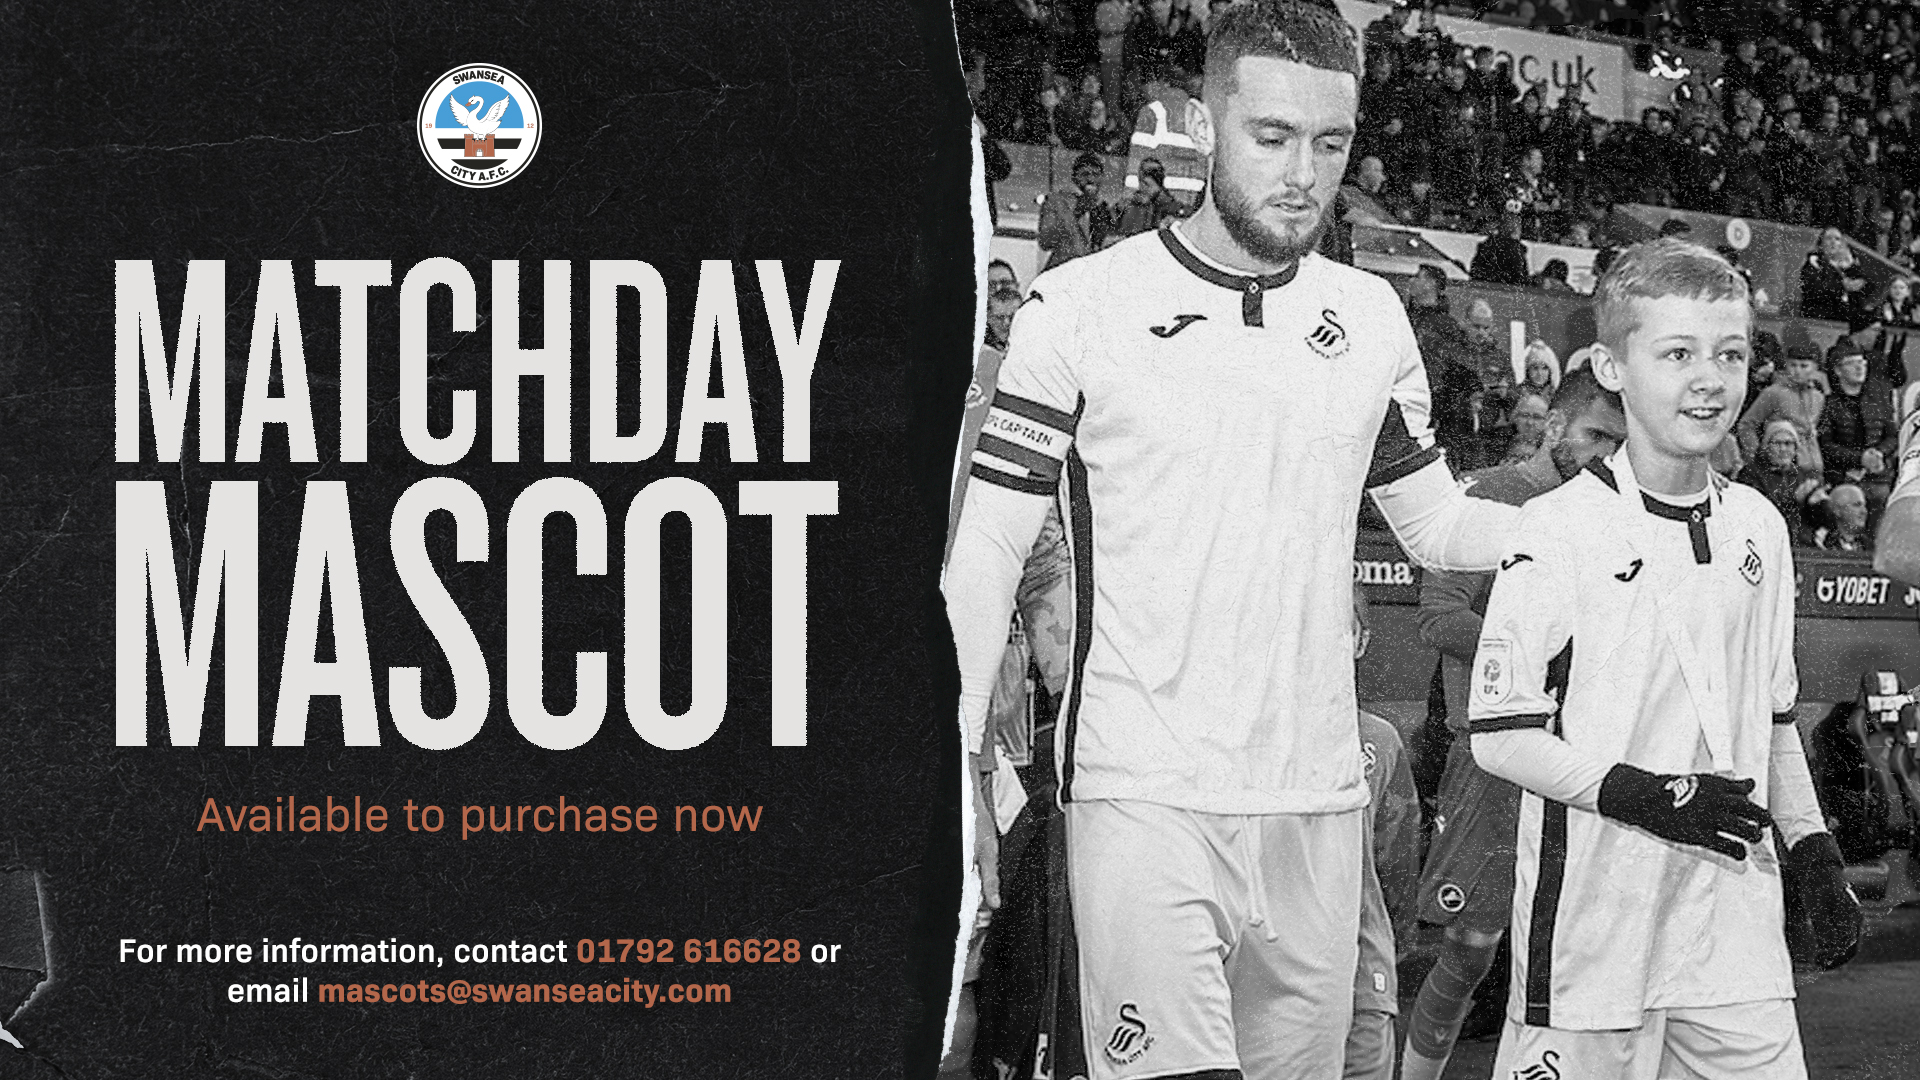 Matchday mascot - email: mascots@swanseacity.com for details